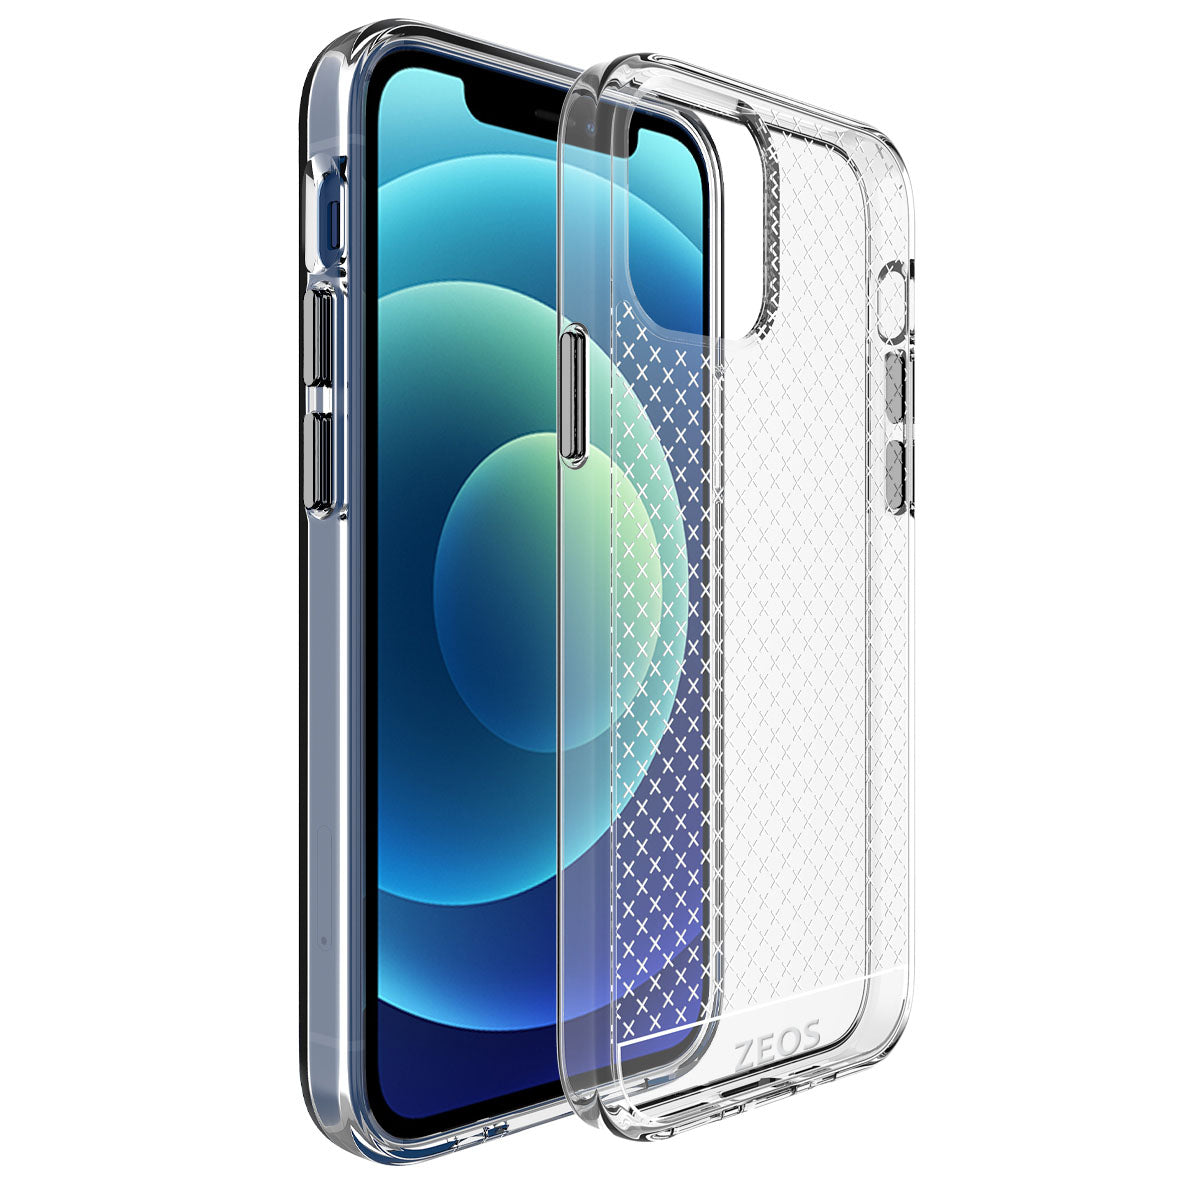 ZEOS KLARITY-X Clear CASE for iPhone 11